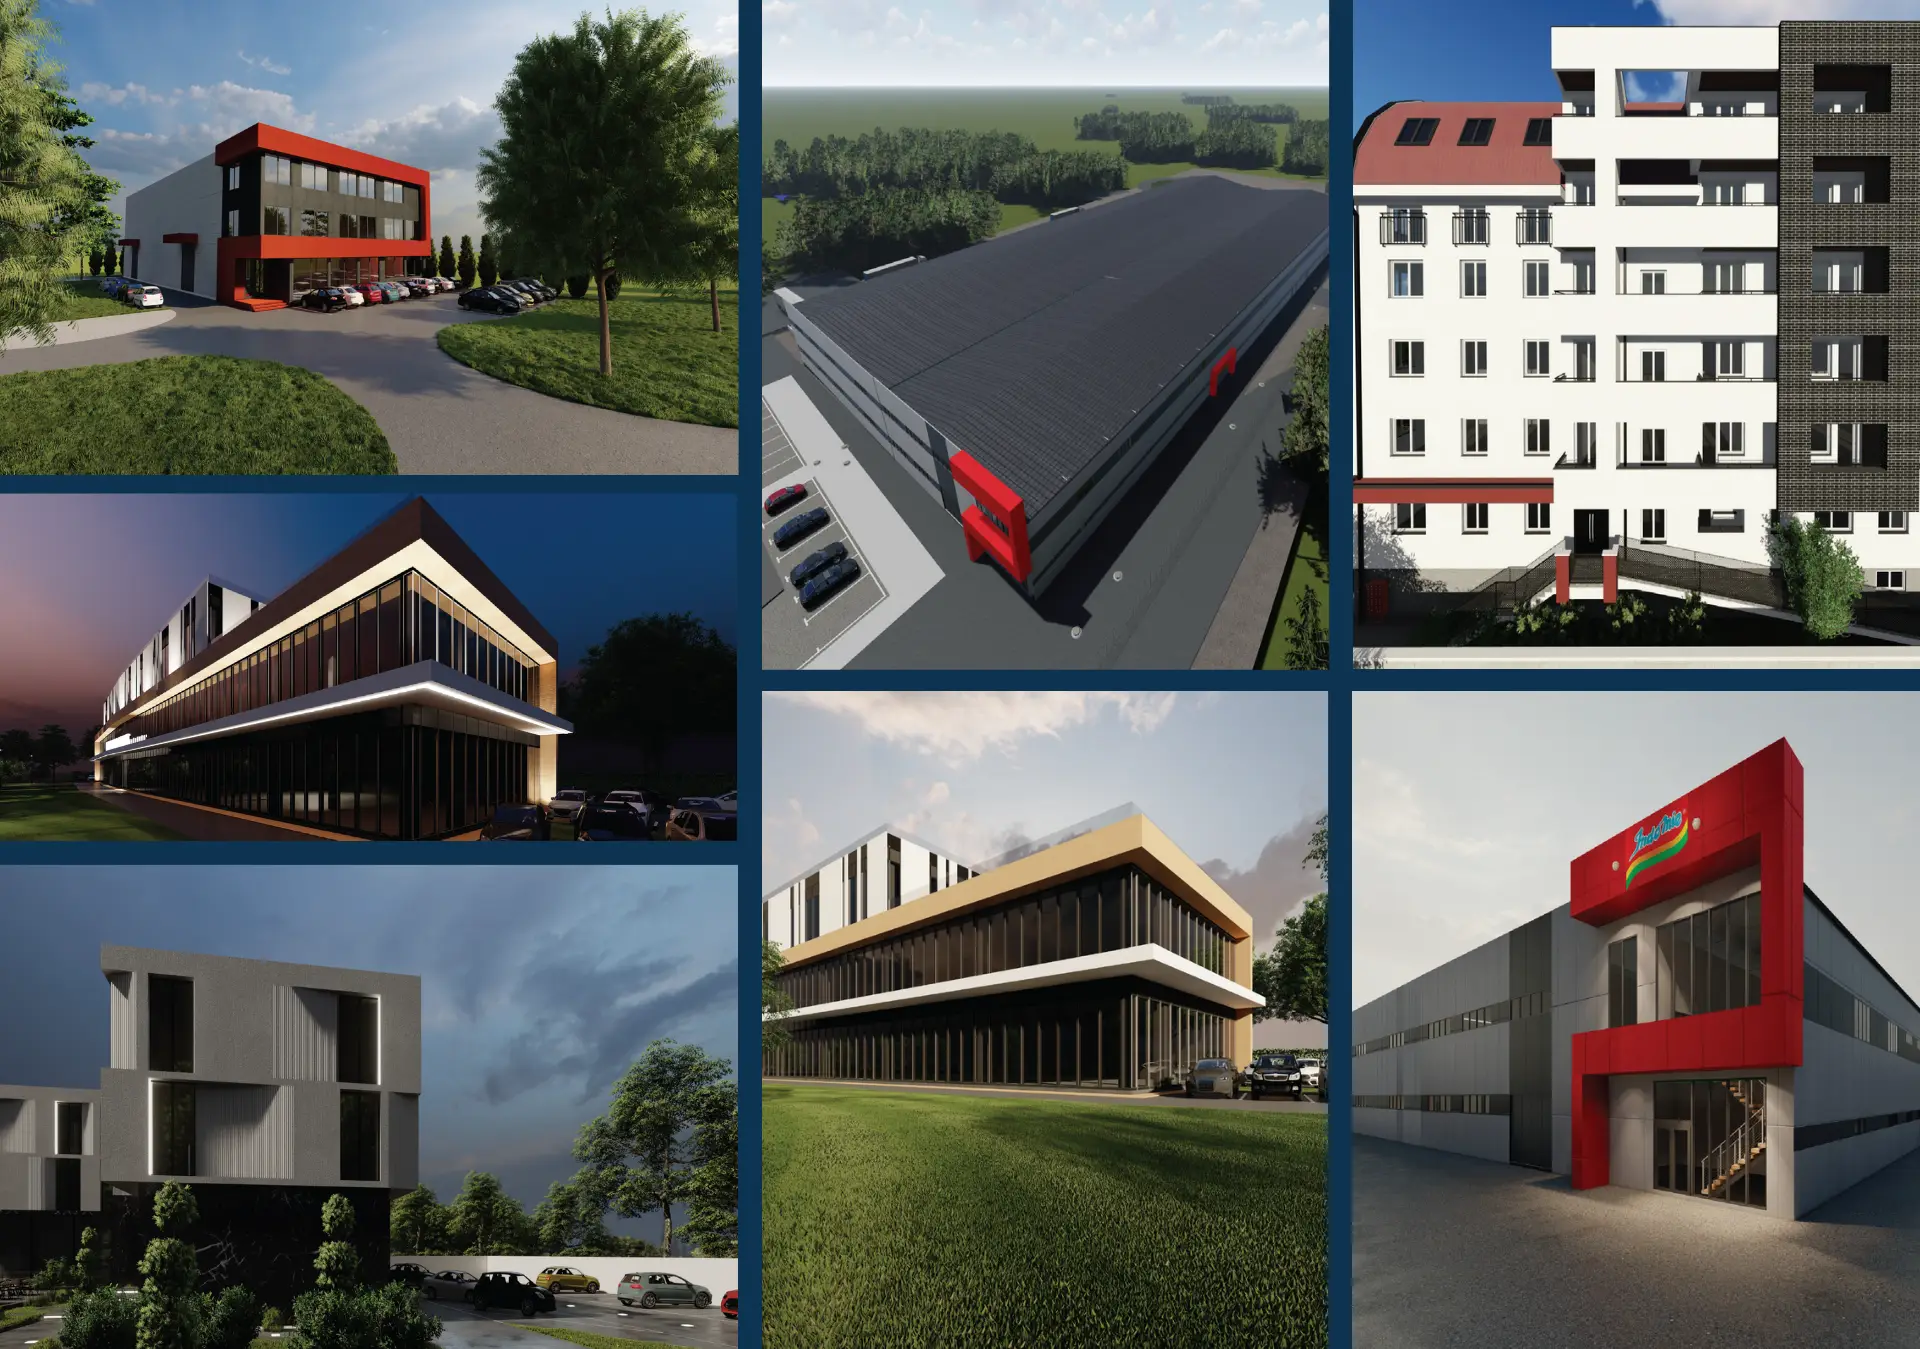 A collage of various modern buildings designed by MG Projekt, showcasing different architectural styles and designs, including commercial, residential, and industrial structures.